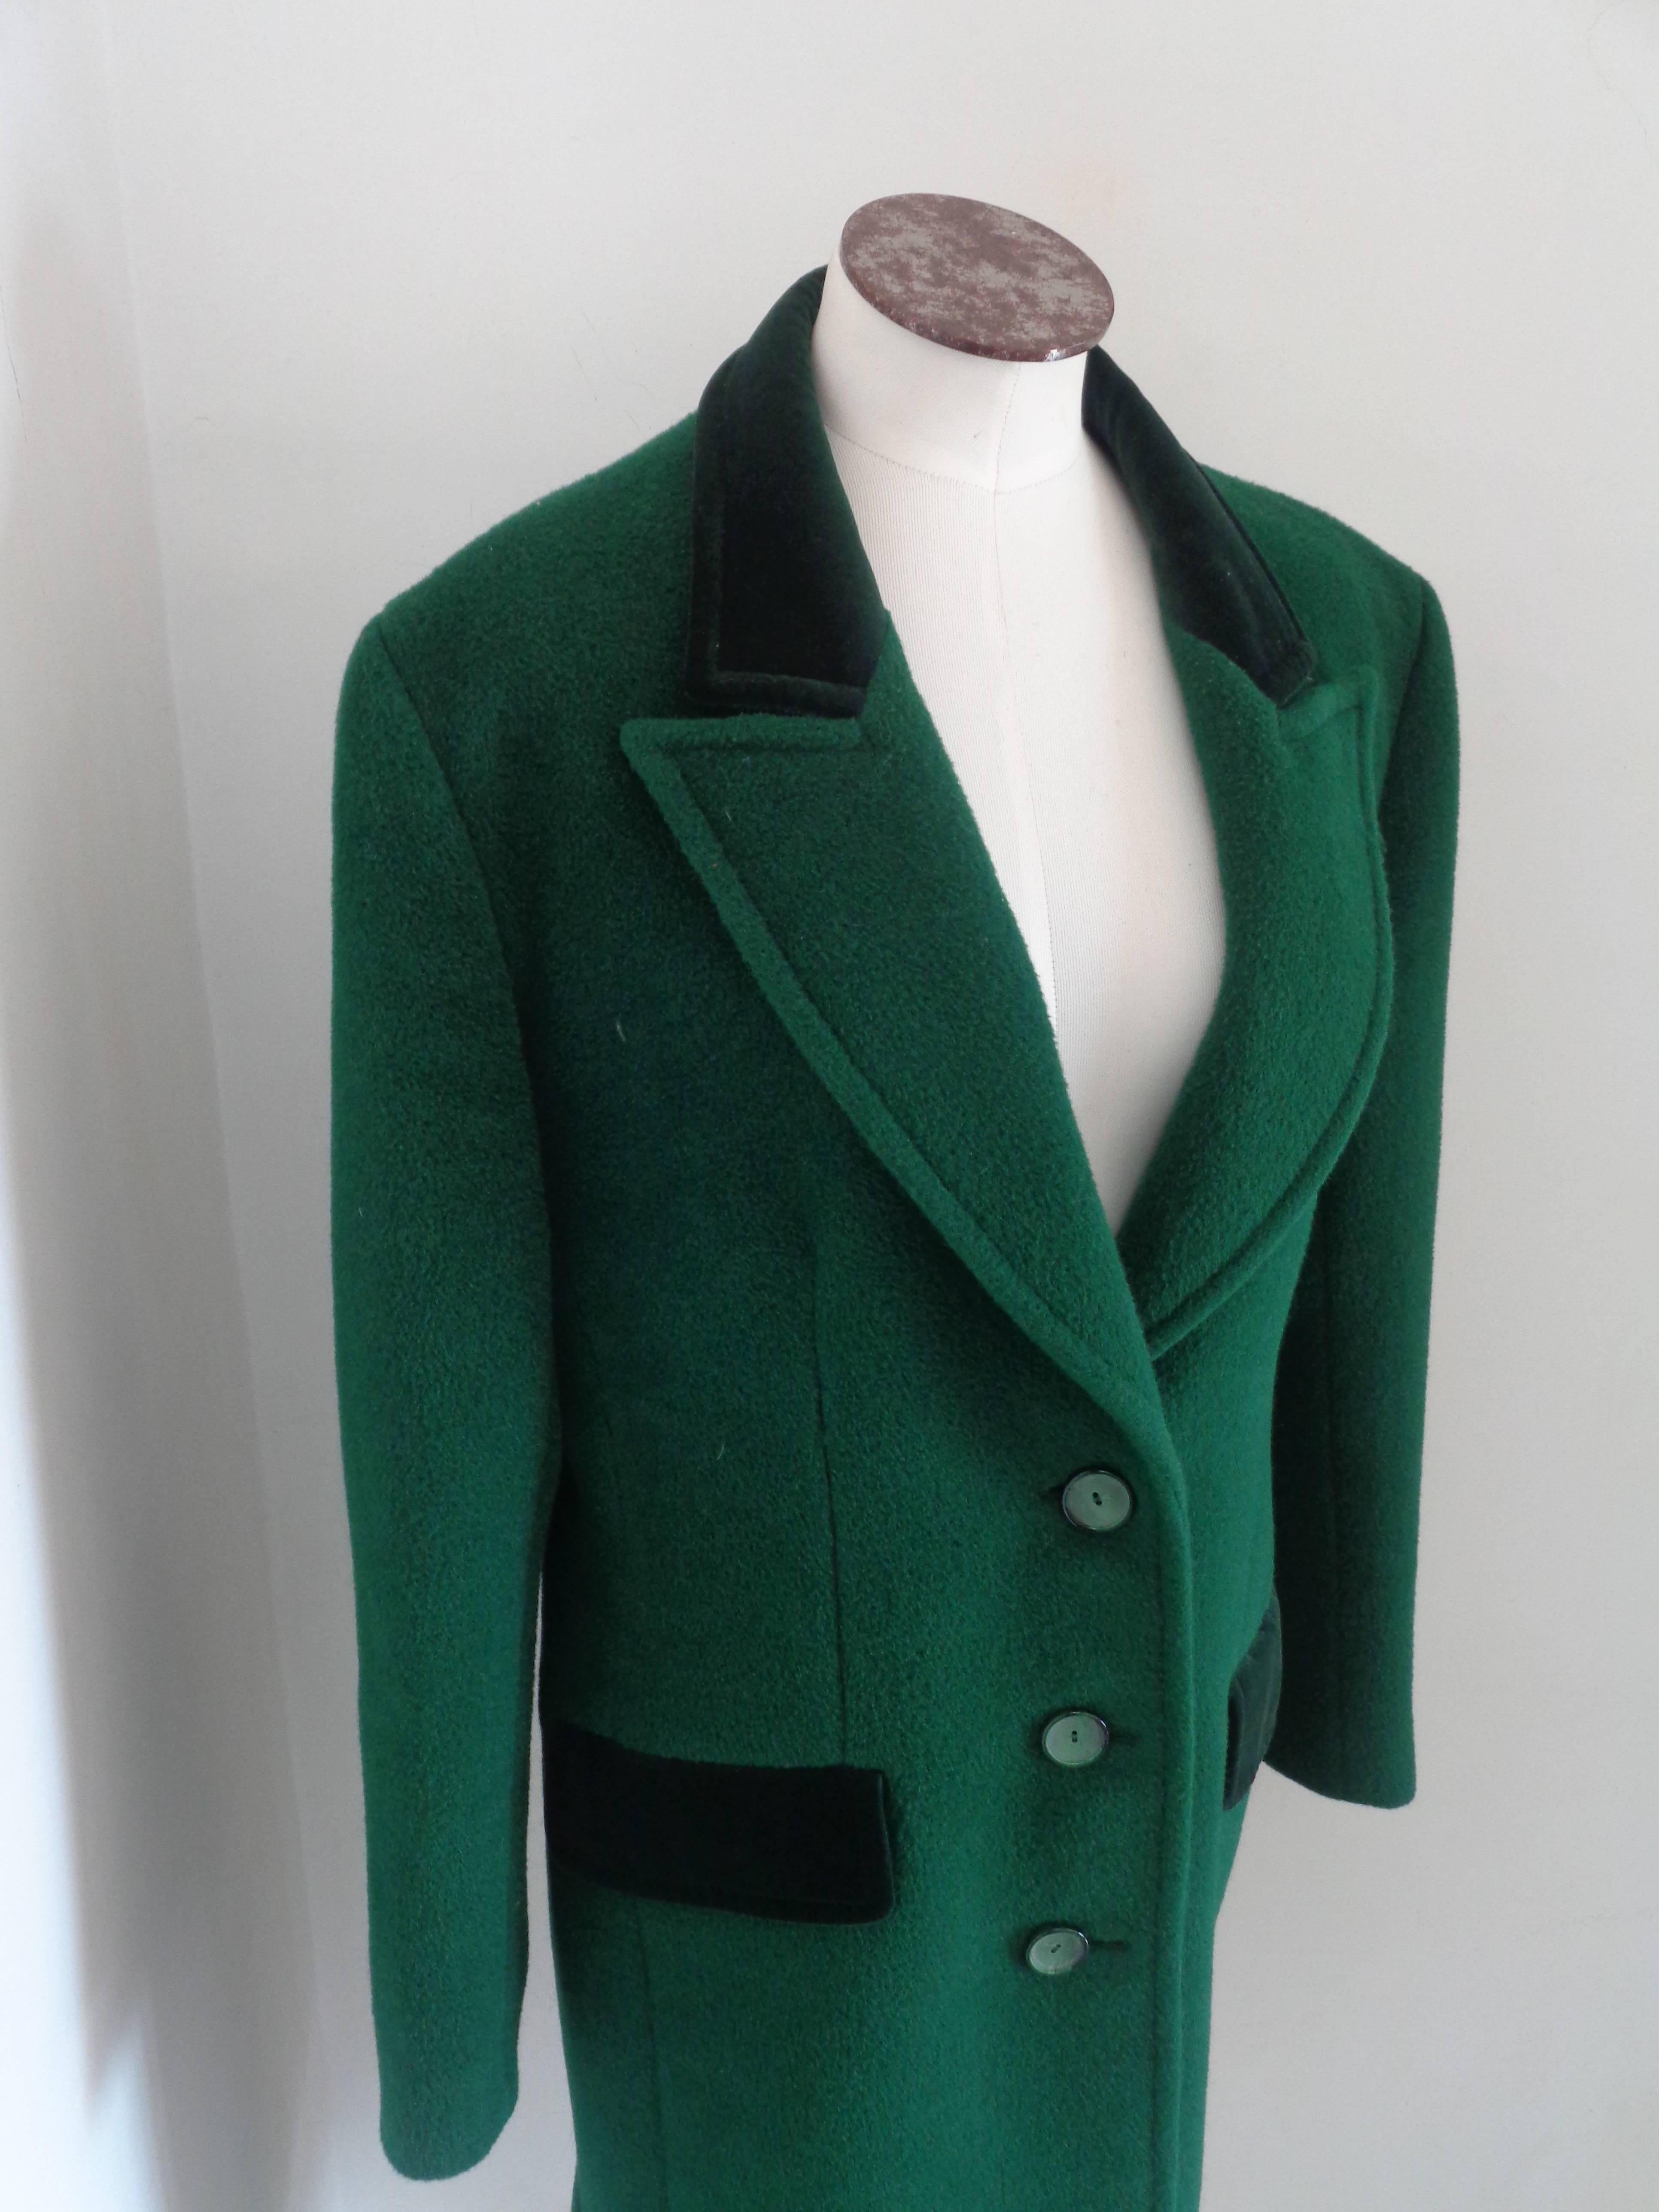 Valentino Green Coat

Totally made in italy in size 46